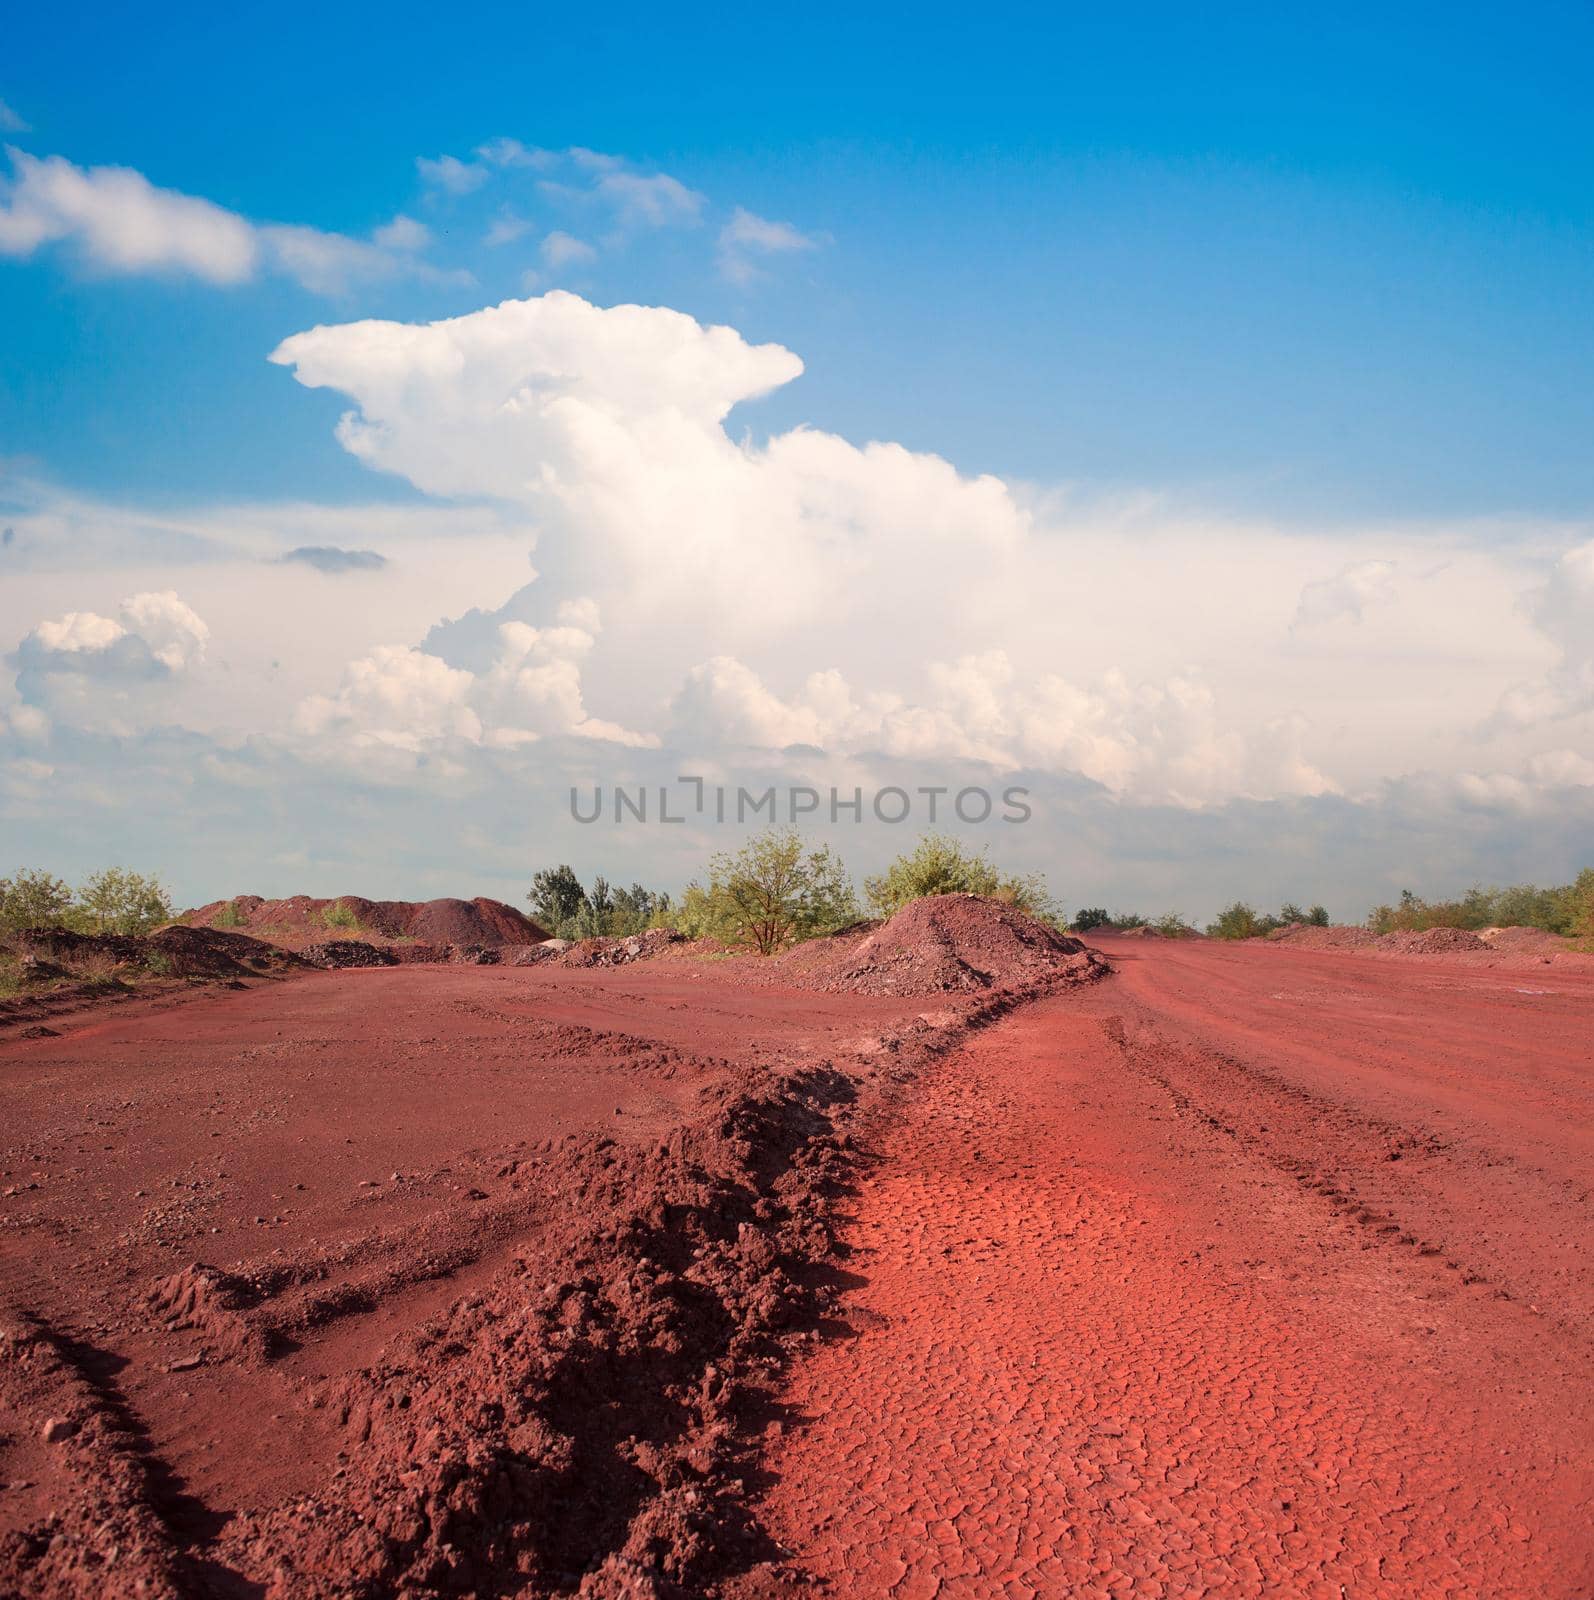 tracks and heaps of red iron oxid land and view on blue sky in Krivyi Rih, Ukraine